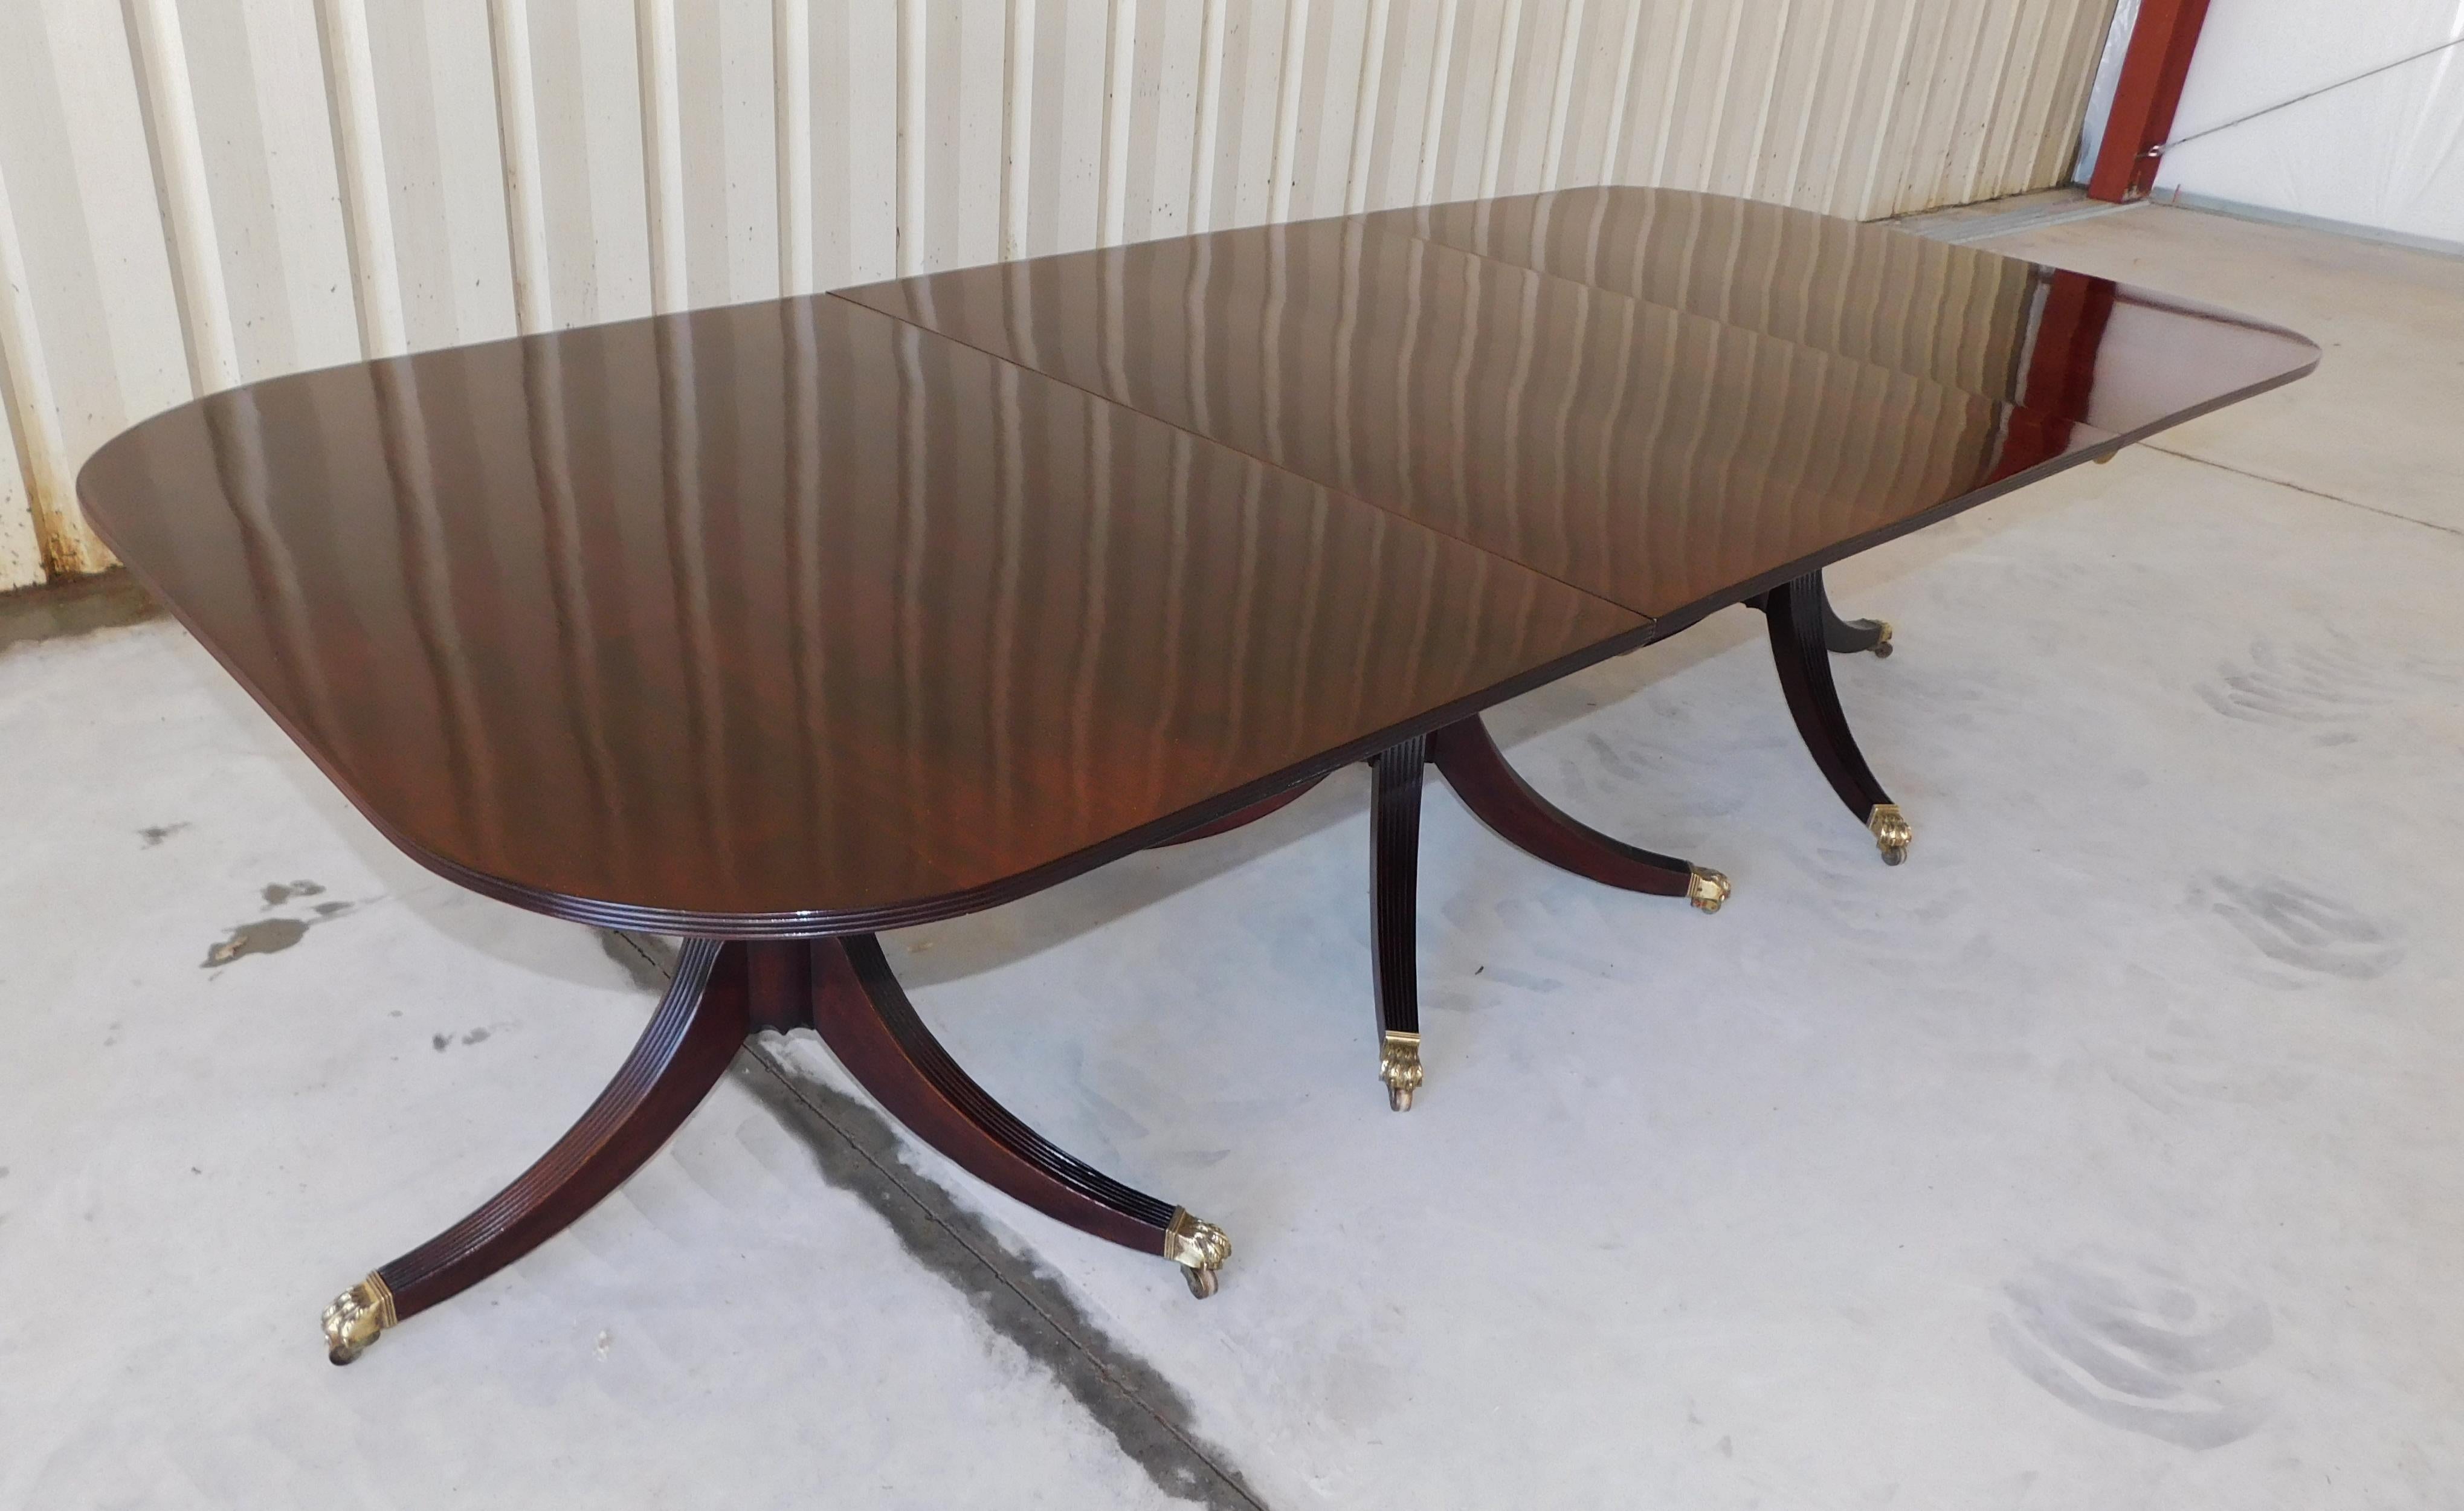 English Mahogany Triple Pedestal Dining Room Table with Orig. Paw Casters C 1840 For Sale 7